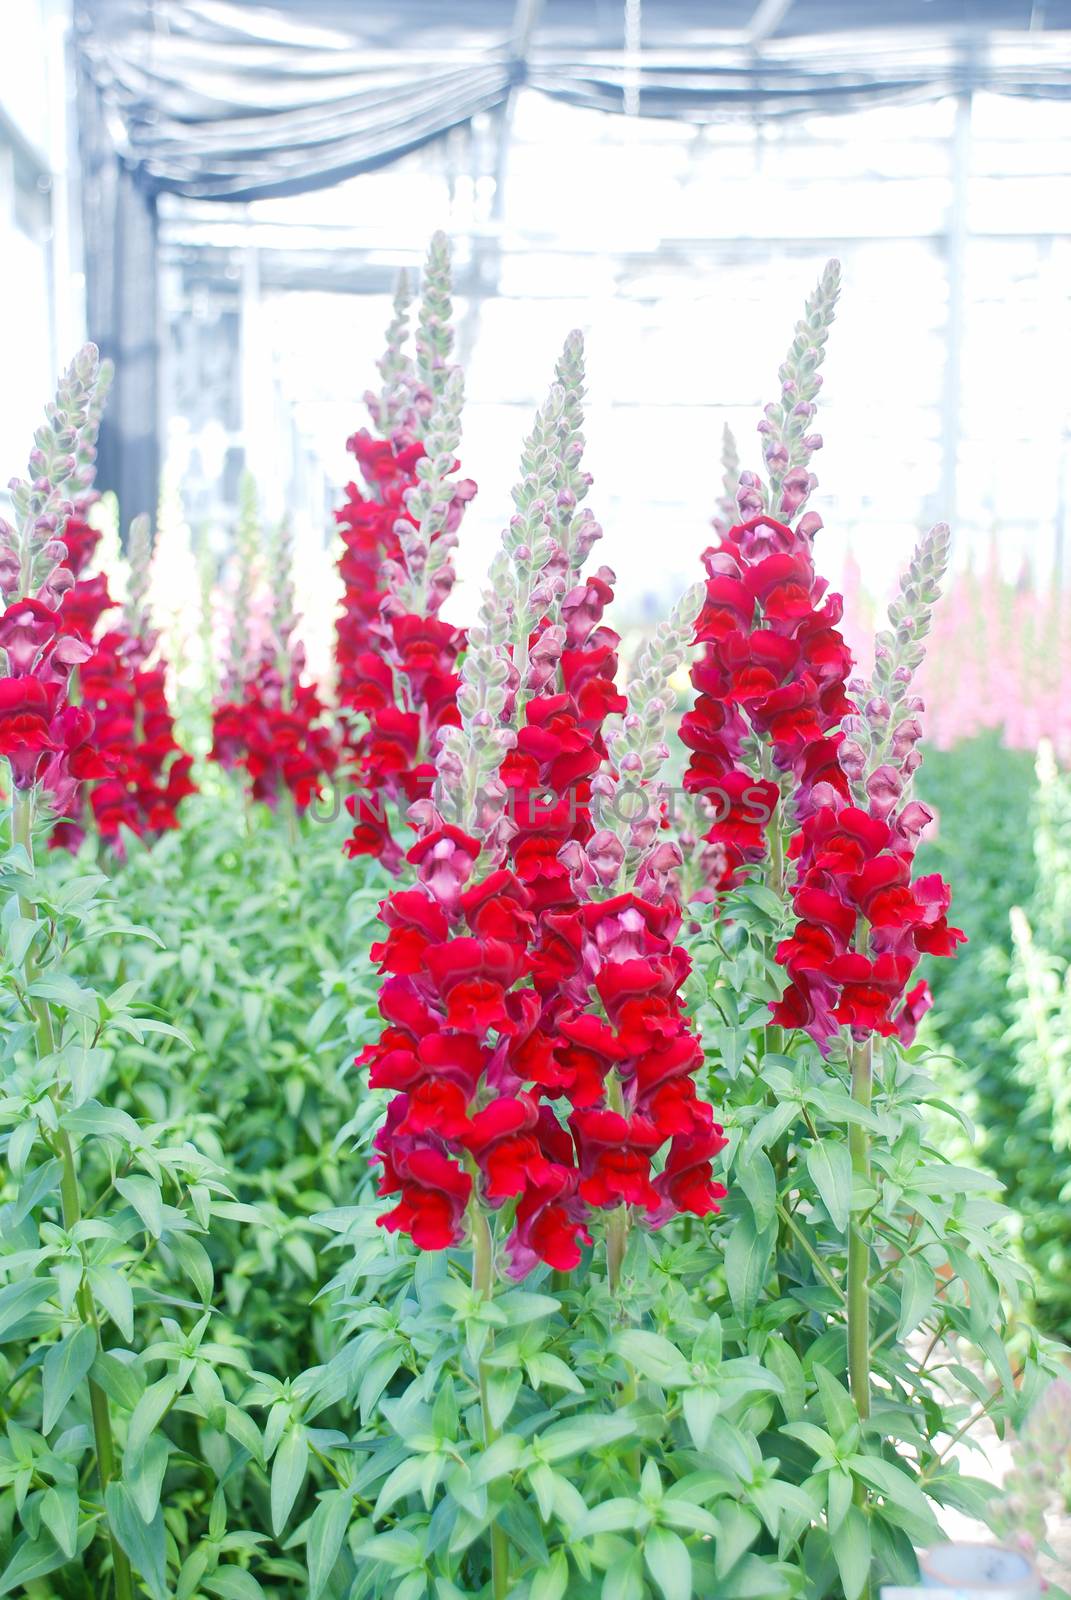 colorful Snap dragon (Antirrhinum majus) blooming in garden background with selectived focus, cut flowers